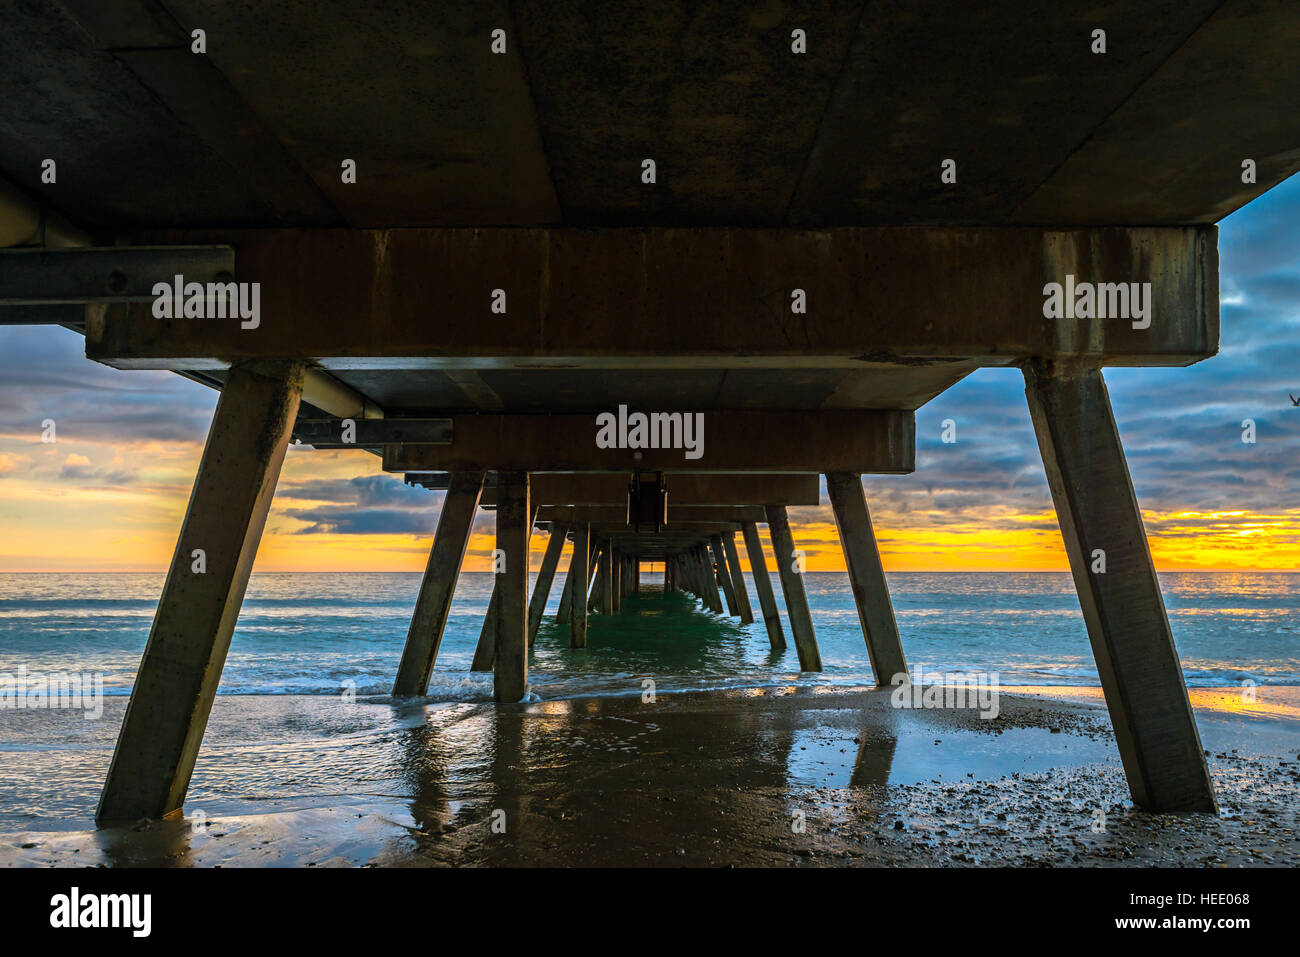 Glenelg Jetty at sunset, view from down under, South Australia Stock Photo